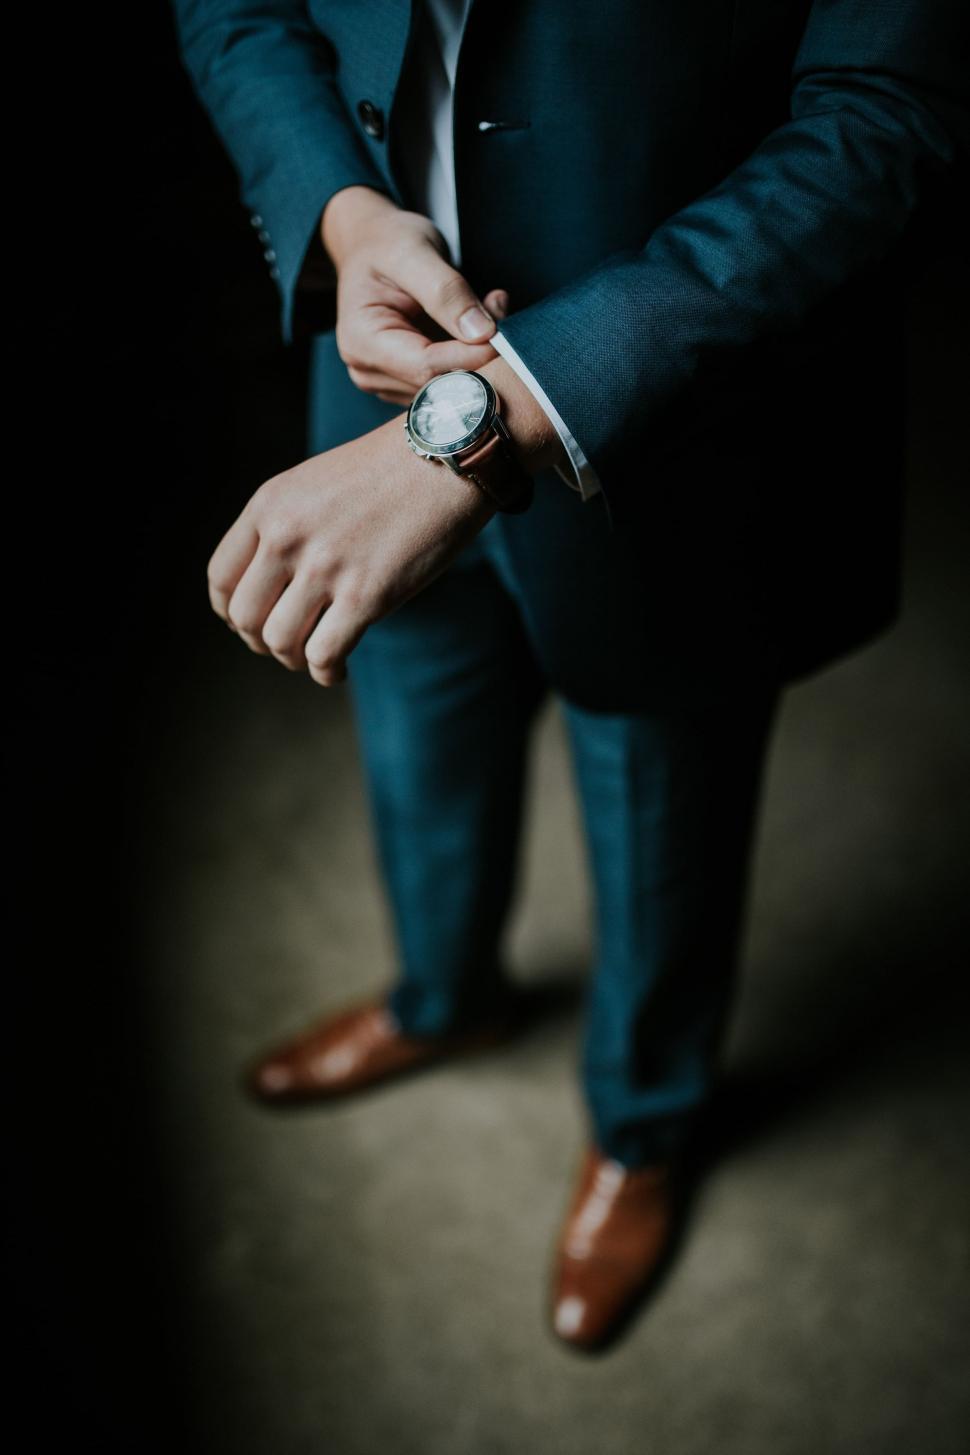 Free Image of Man in Suit 